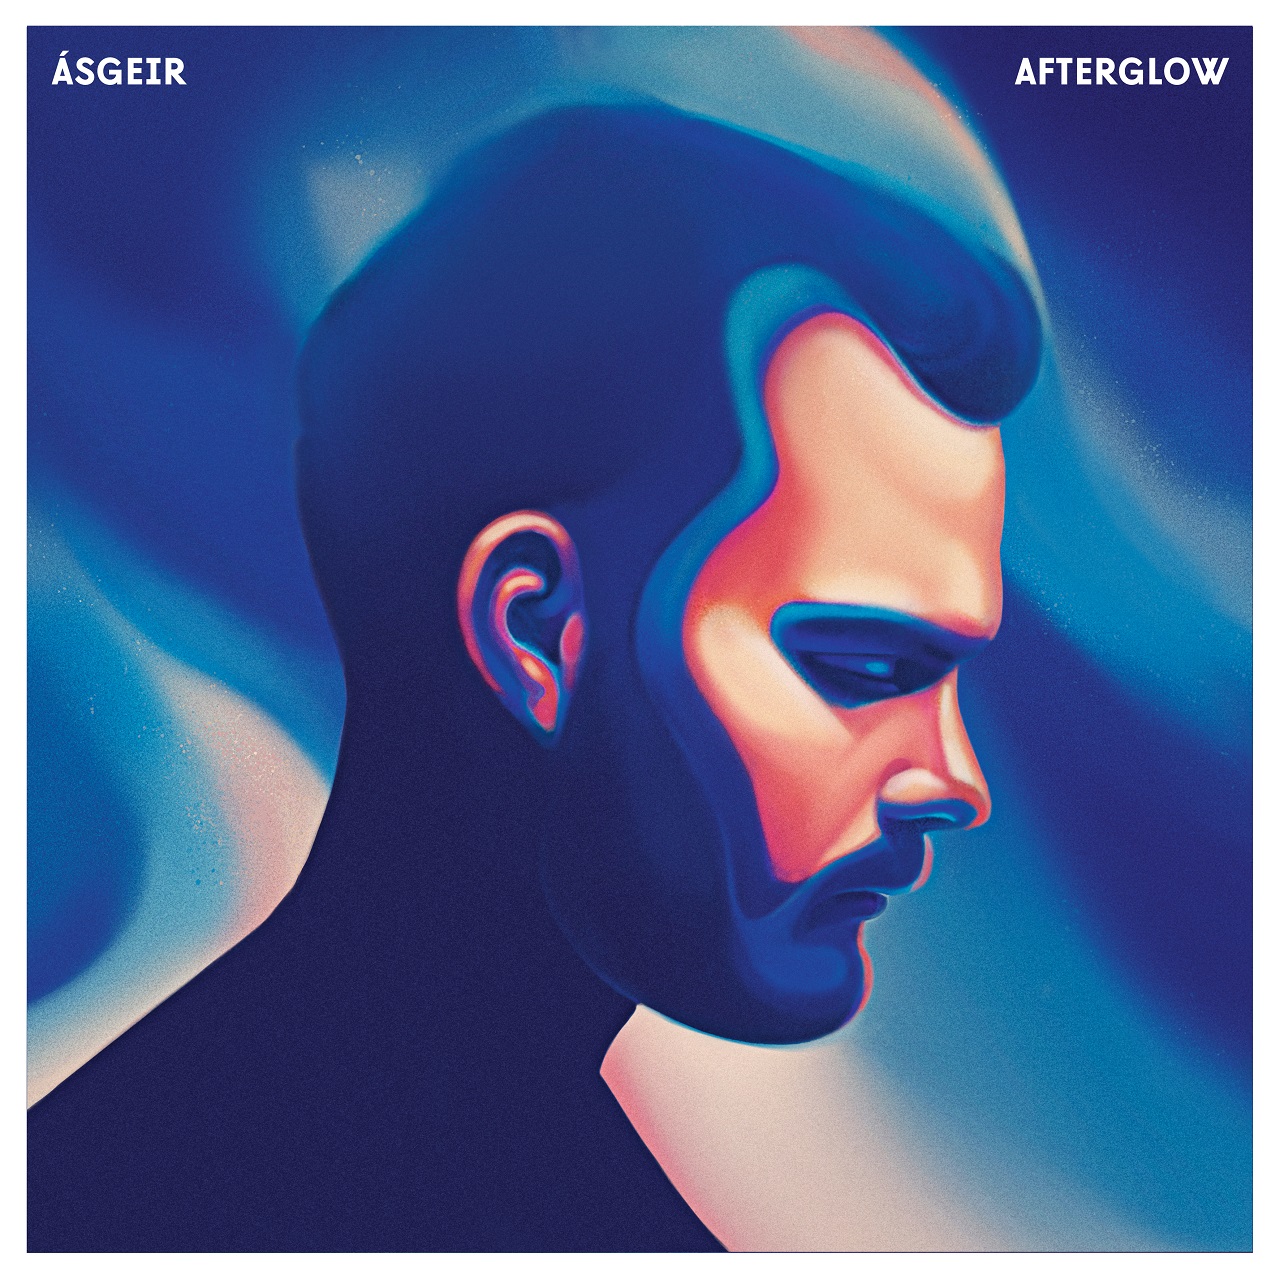 Cover Album "Afterglow"